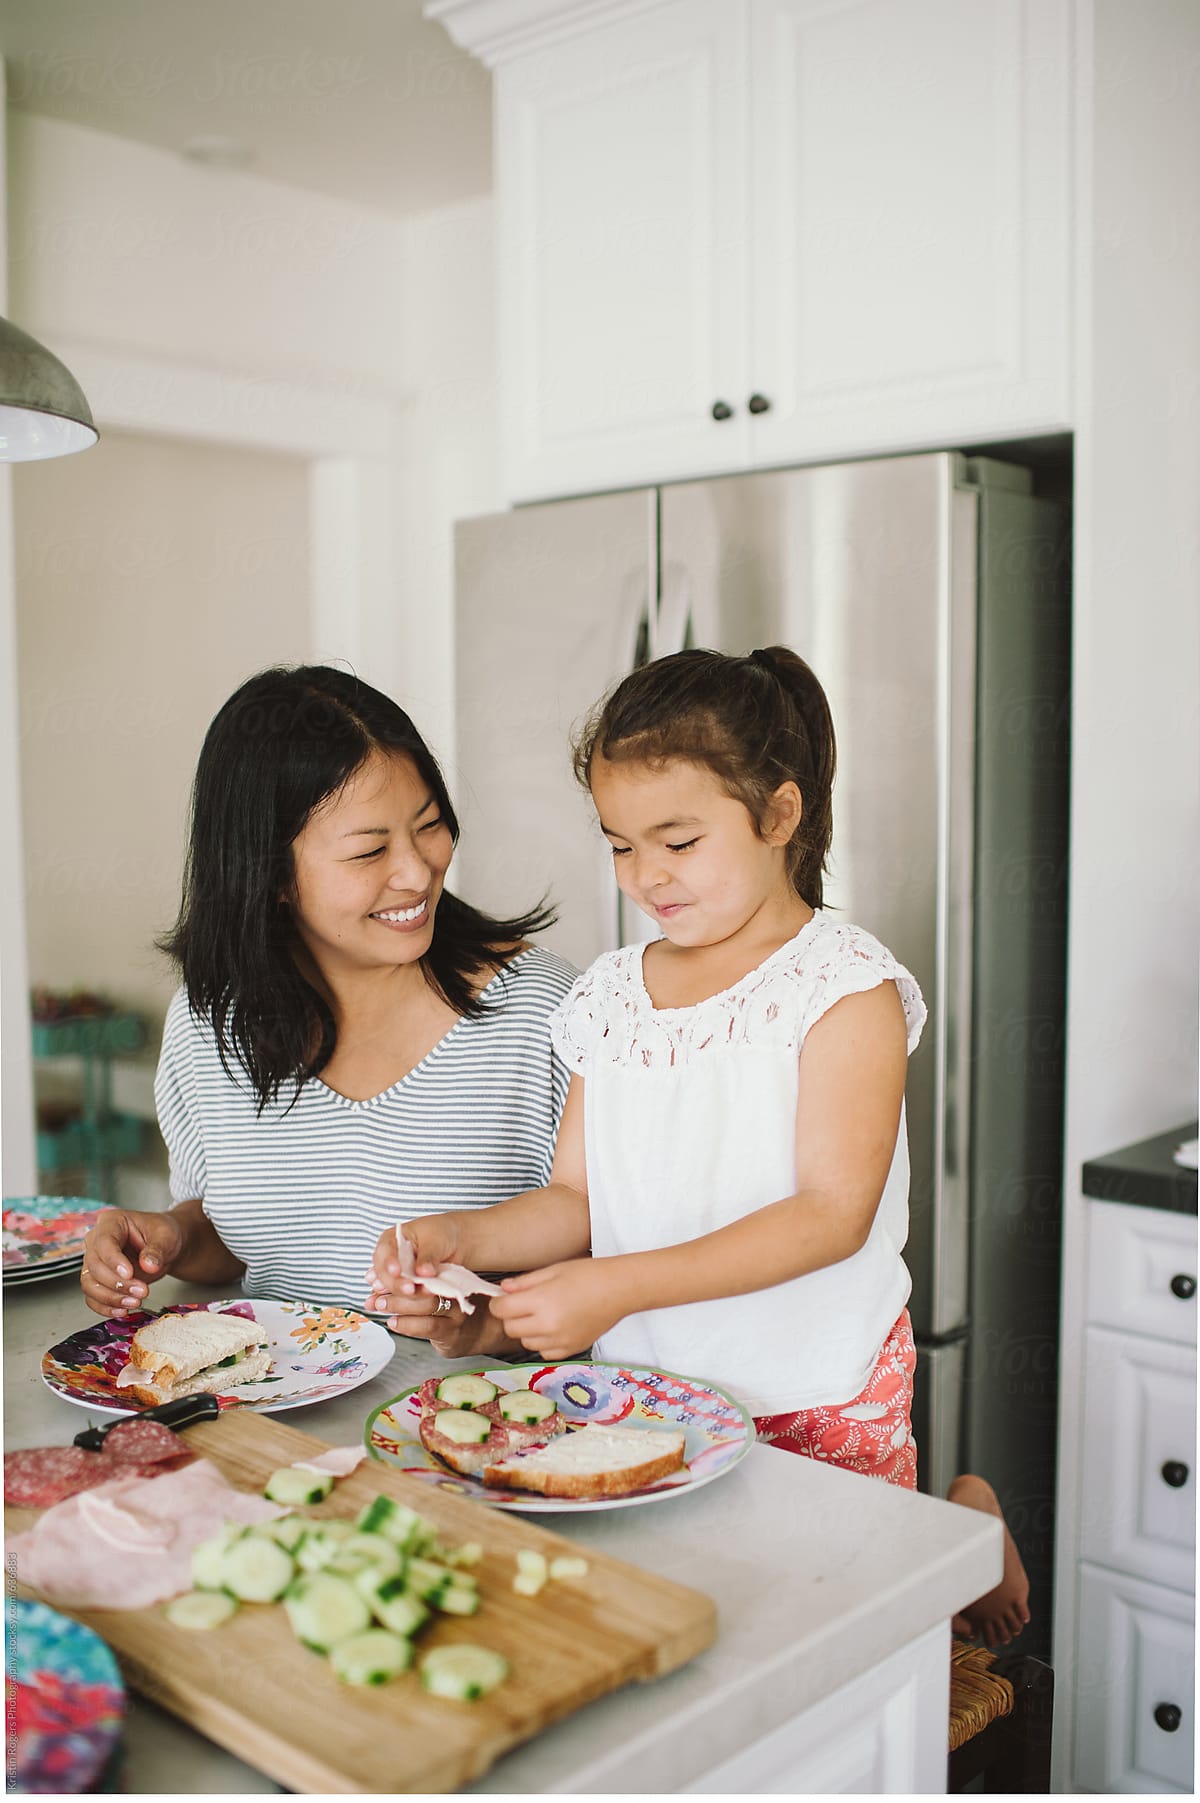 Mom And Daughter Making Lunch Together In Kitchen By Stocksy